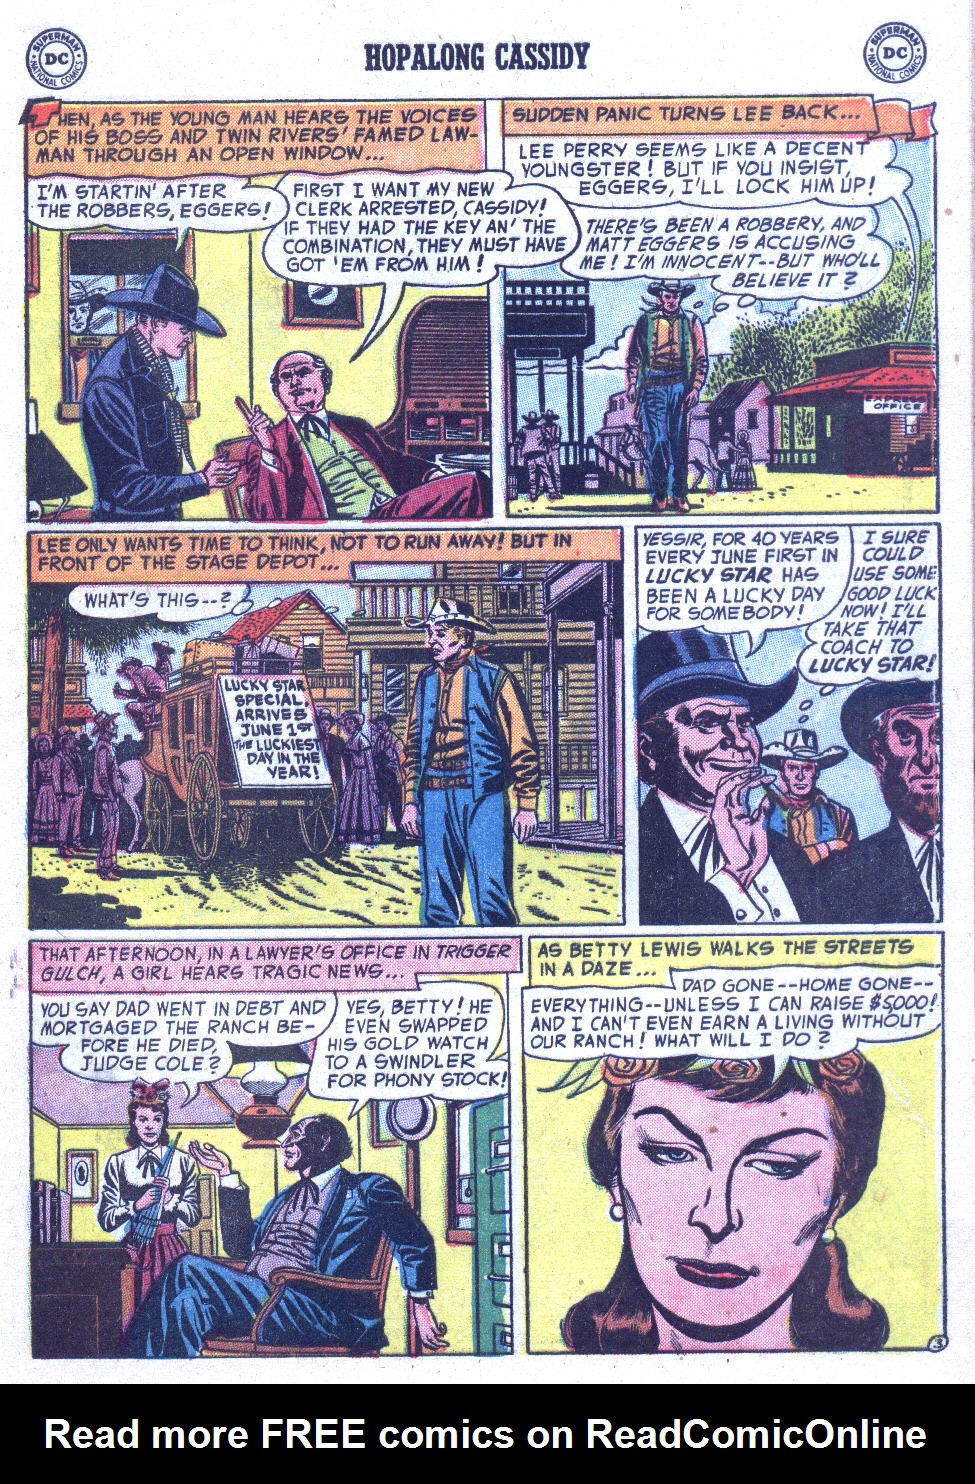 Read online Hopalong Cassidy comic -  Issue #89 - 5